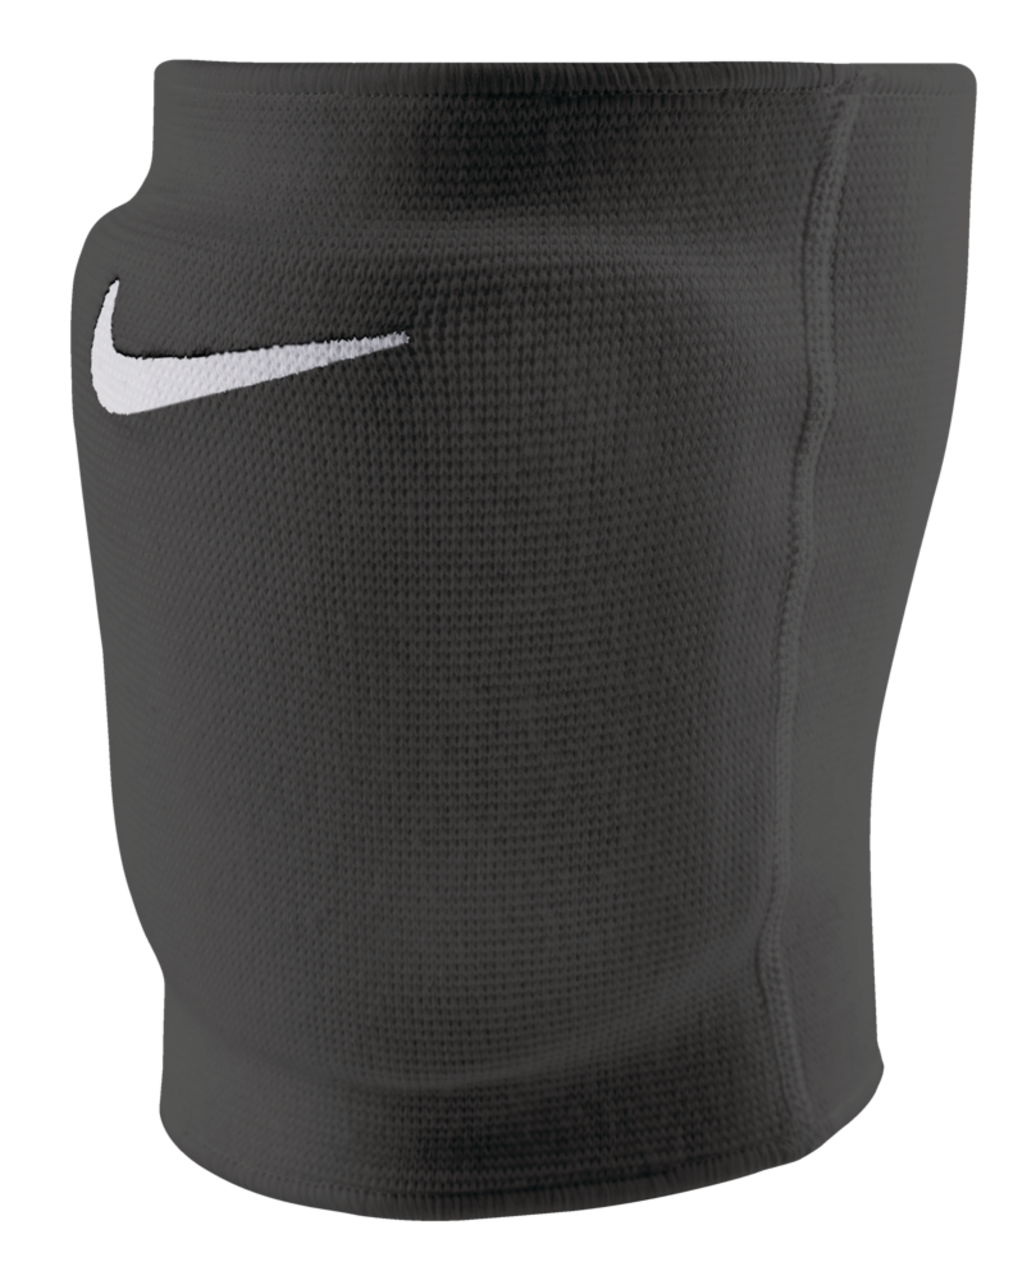 https://media-www.canadiantire.ca/product/playing/team-sports-and-golf/sports-equipment-accessories/1840313/nike-essential-volleyball-knee-pads-black-adult-m-l-0fcdfe15-2b76-472e-a88e-1e9a227a5452.png?imdensity=1&imwidth=640&impolicy=mZoom